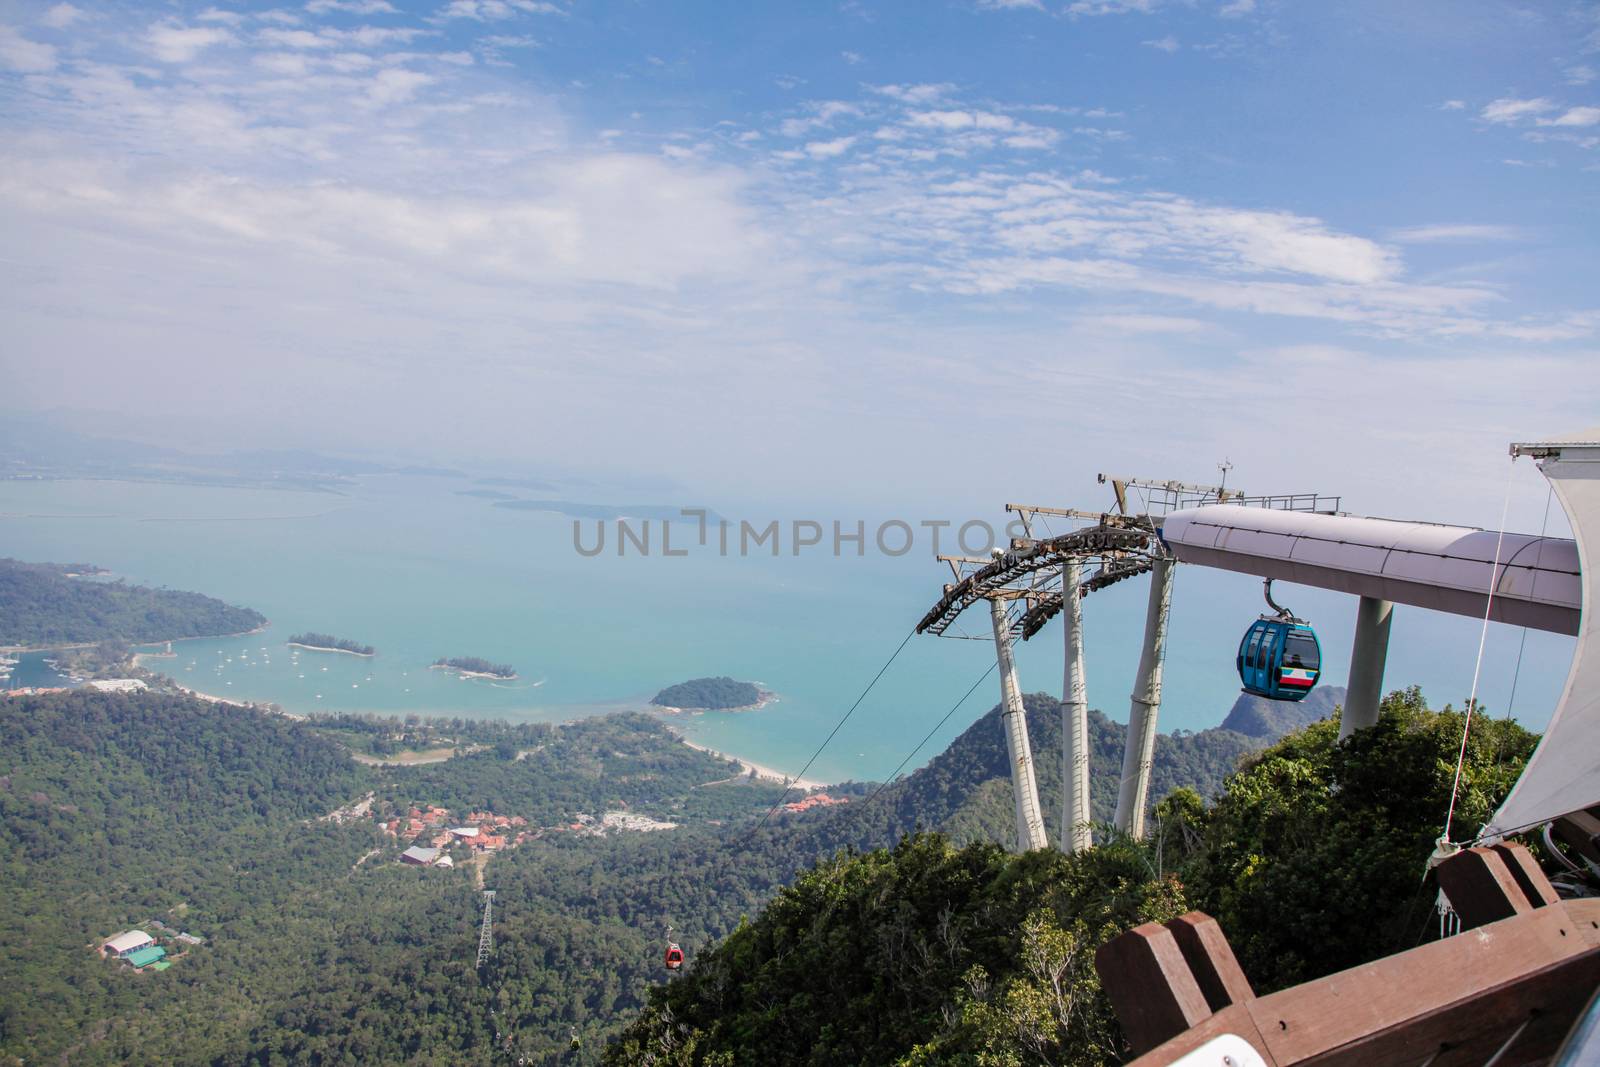 Cable Car in Langkawi, Malaysia by haiderazim